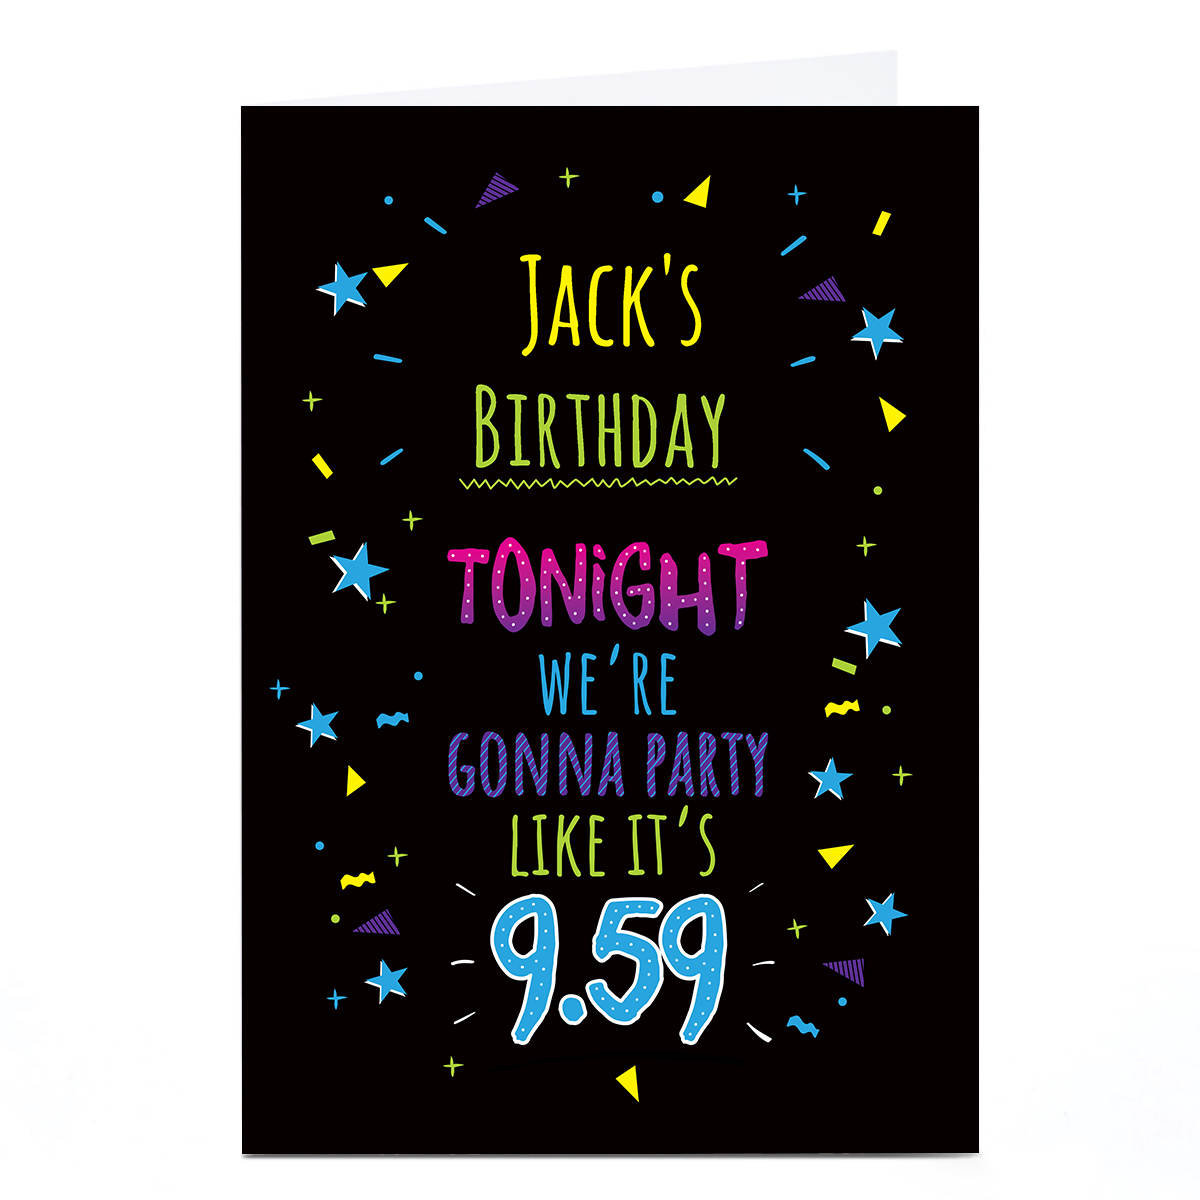 Personalised Lockdown Birthday Card - Gonna party 9:59